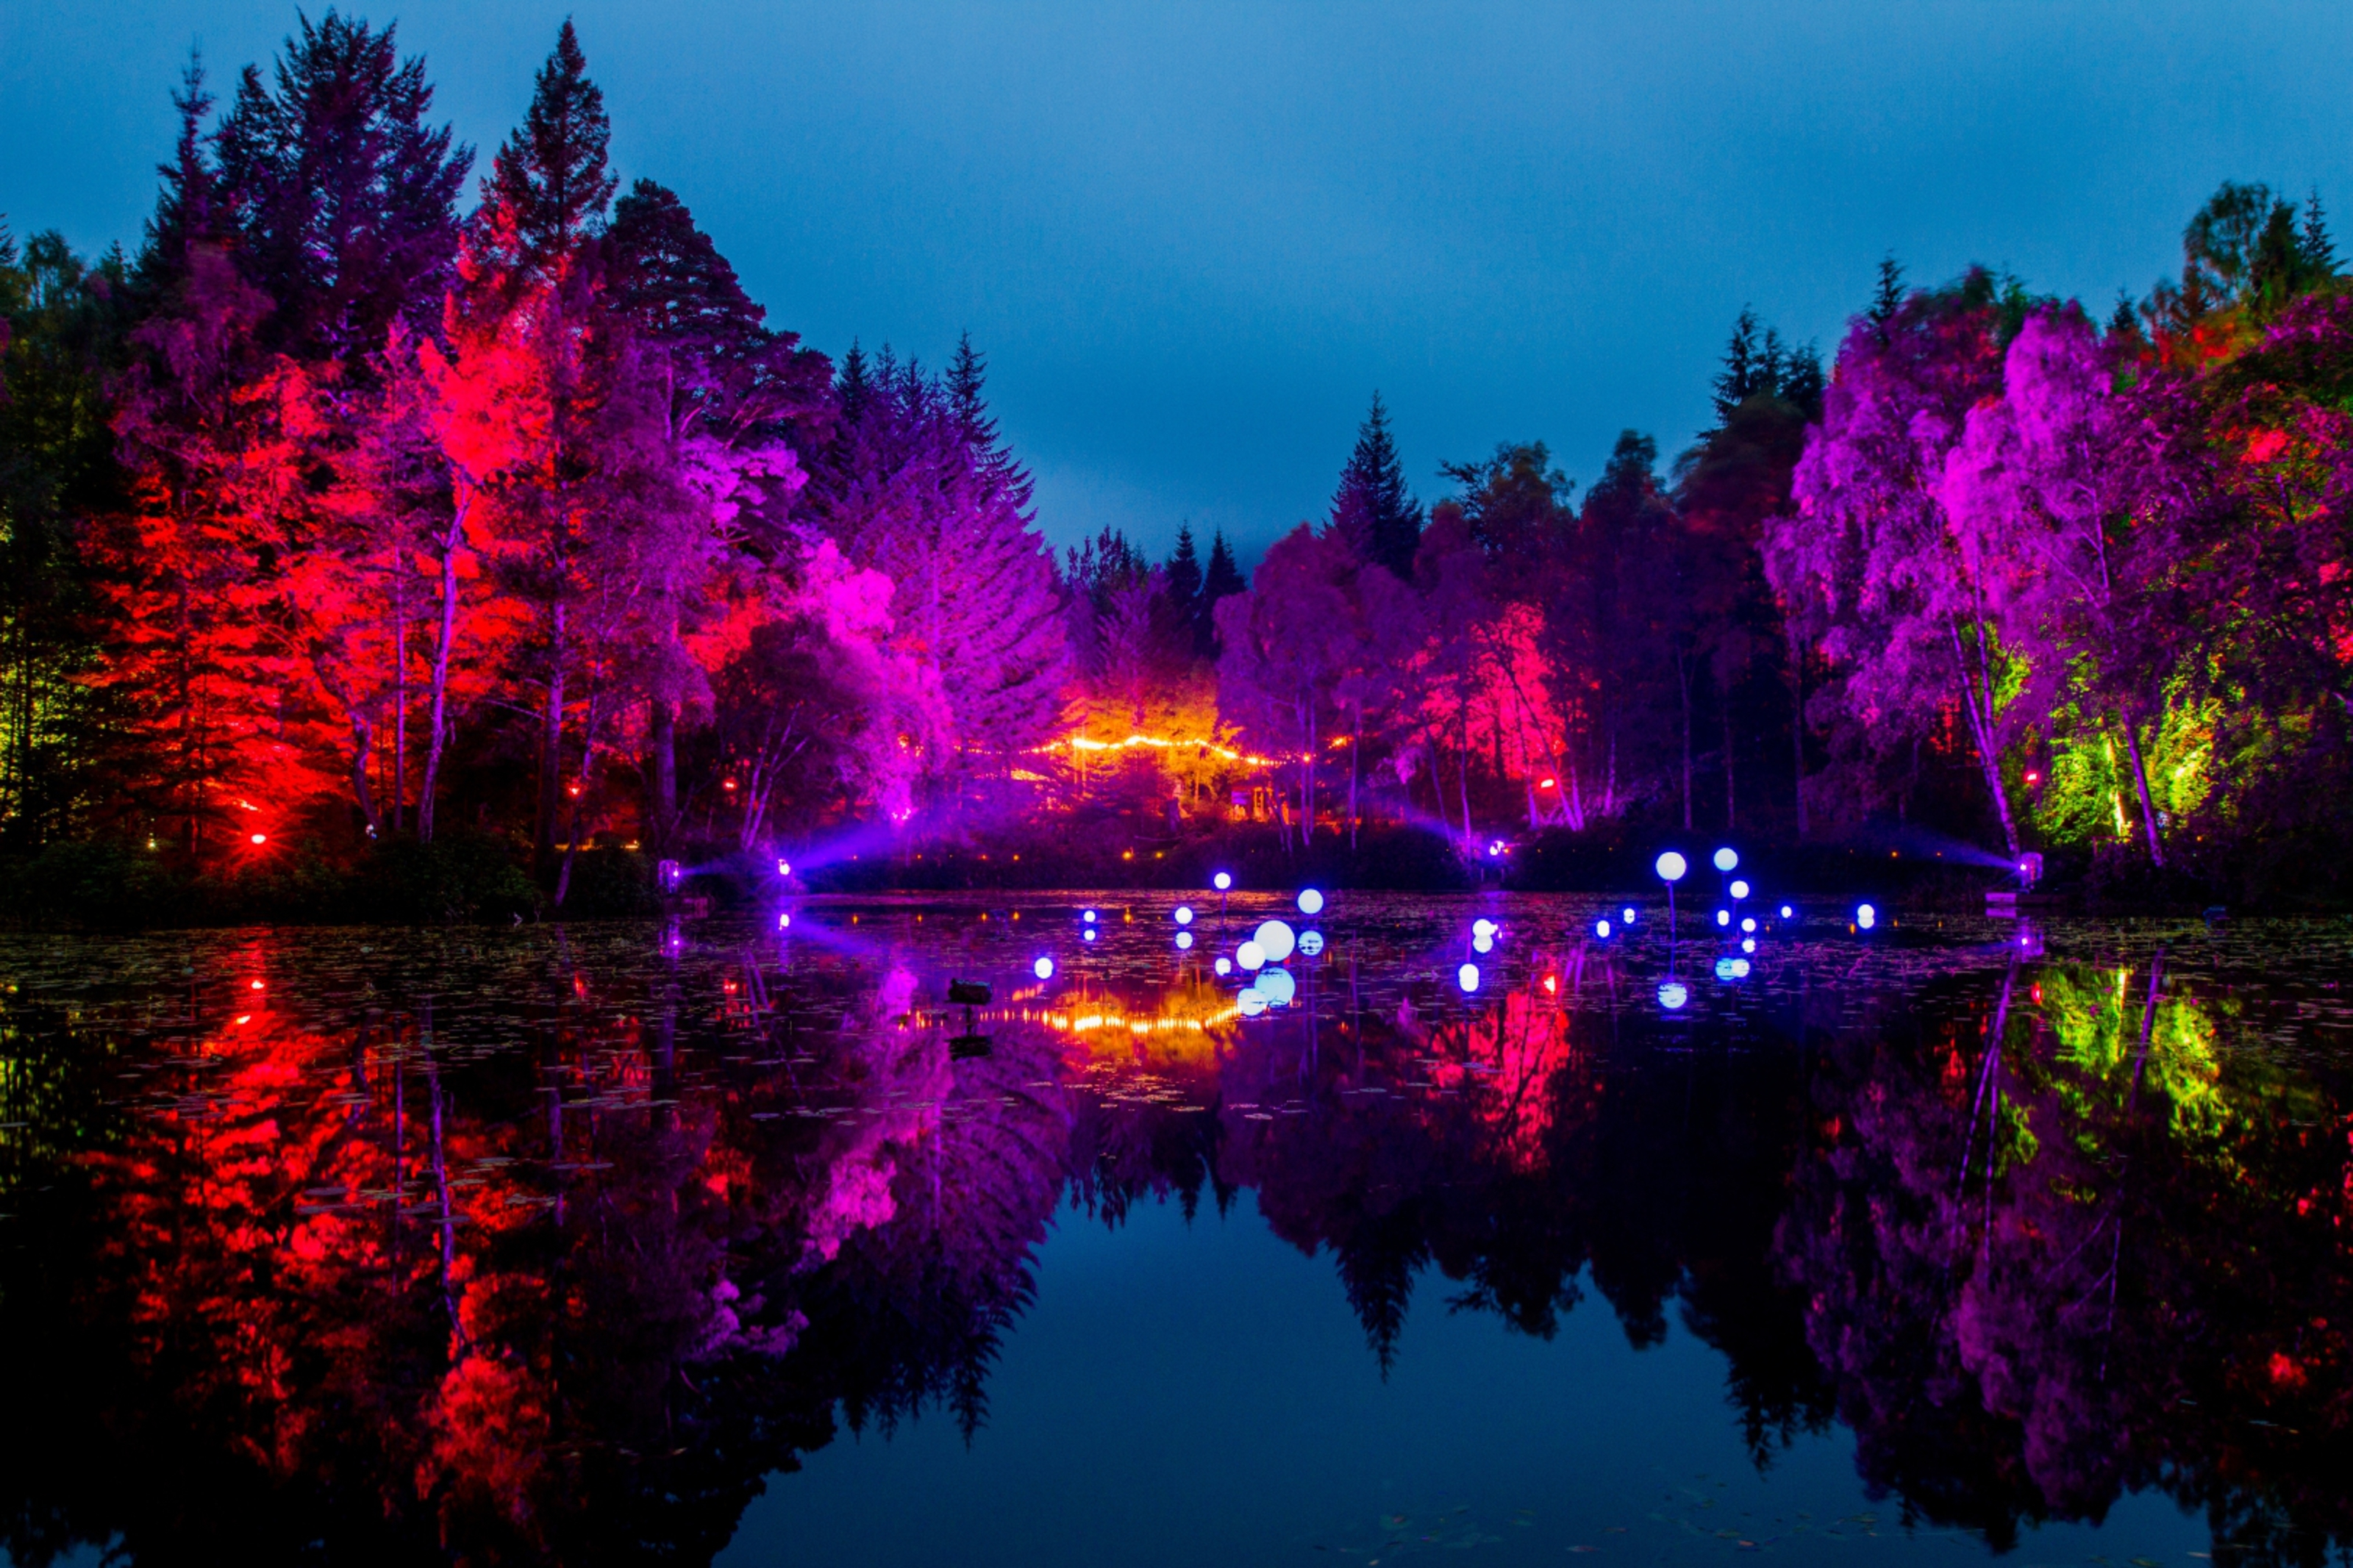 Steve MacDougall, Courier, Enchanted Forest, Faskally Woods, by Pitlochry. Scenes from the preview night. Pictured, view of the lit trees reflected in the water.